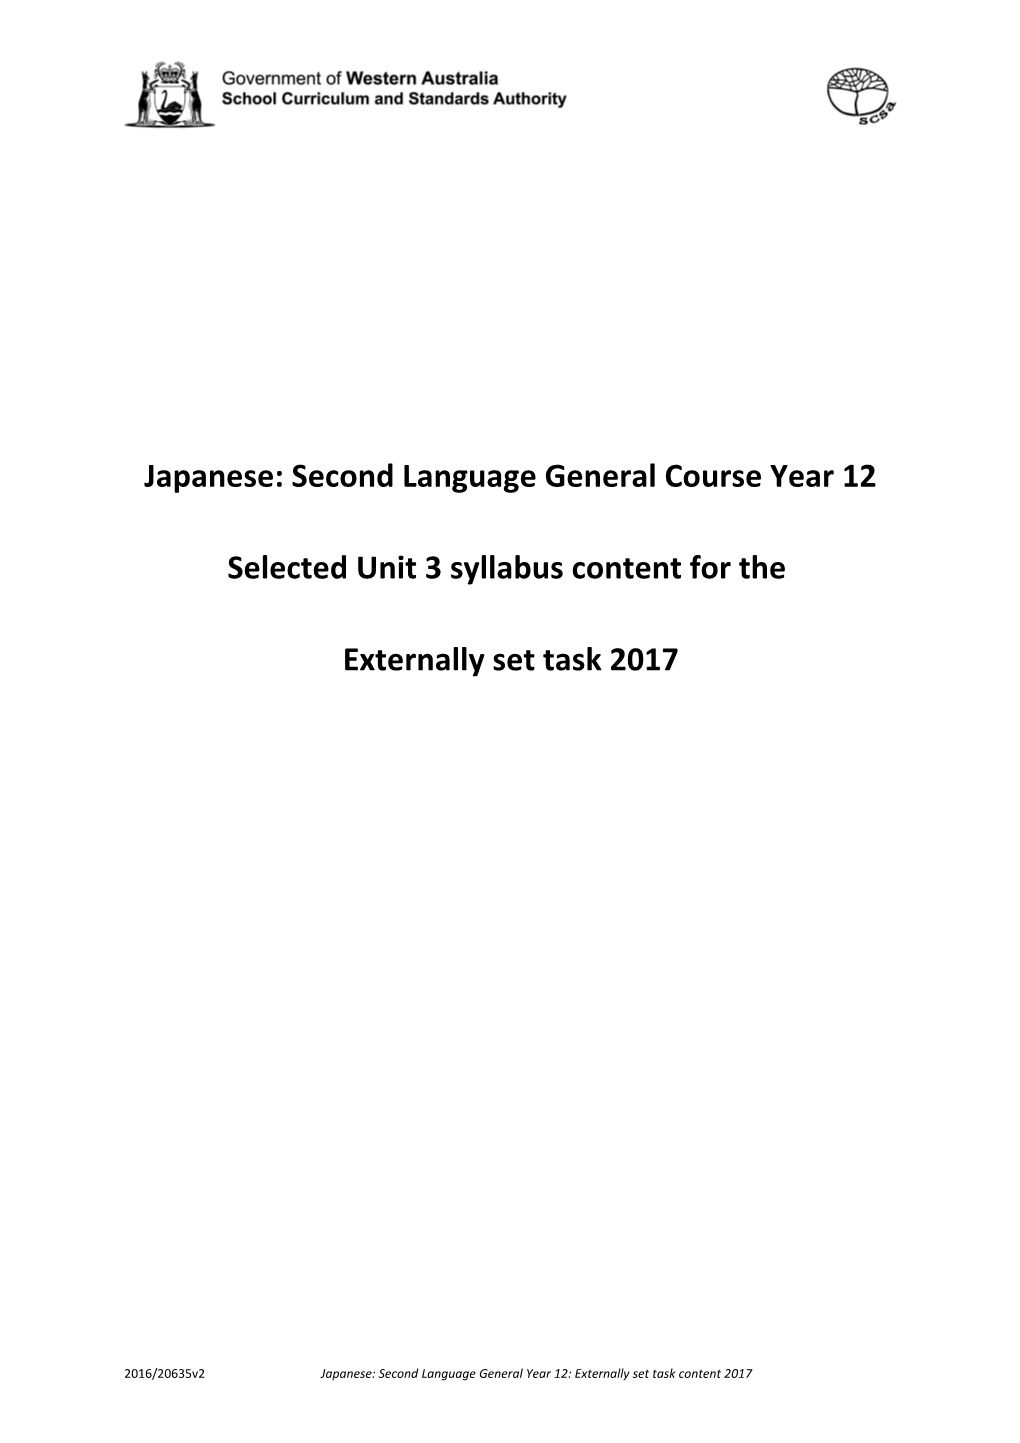 Japanese: Second Language General Course Year 12